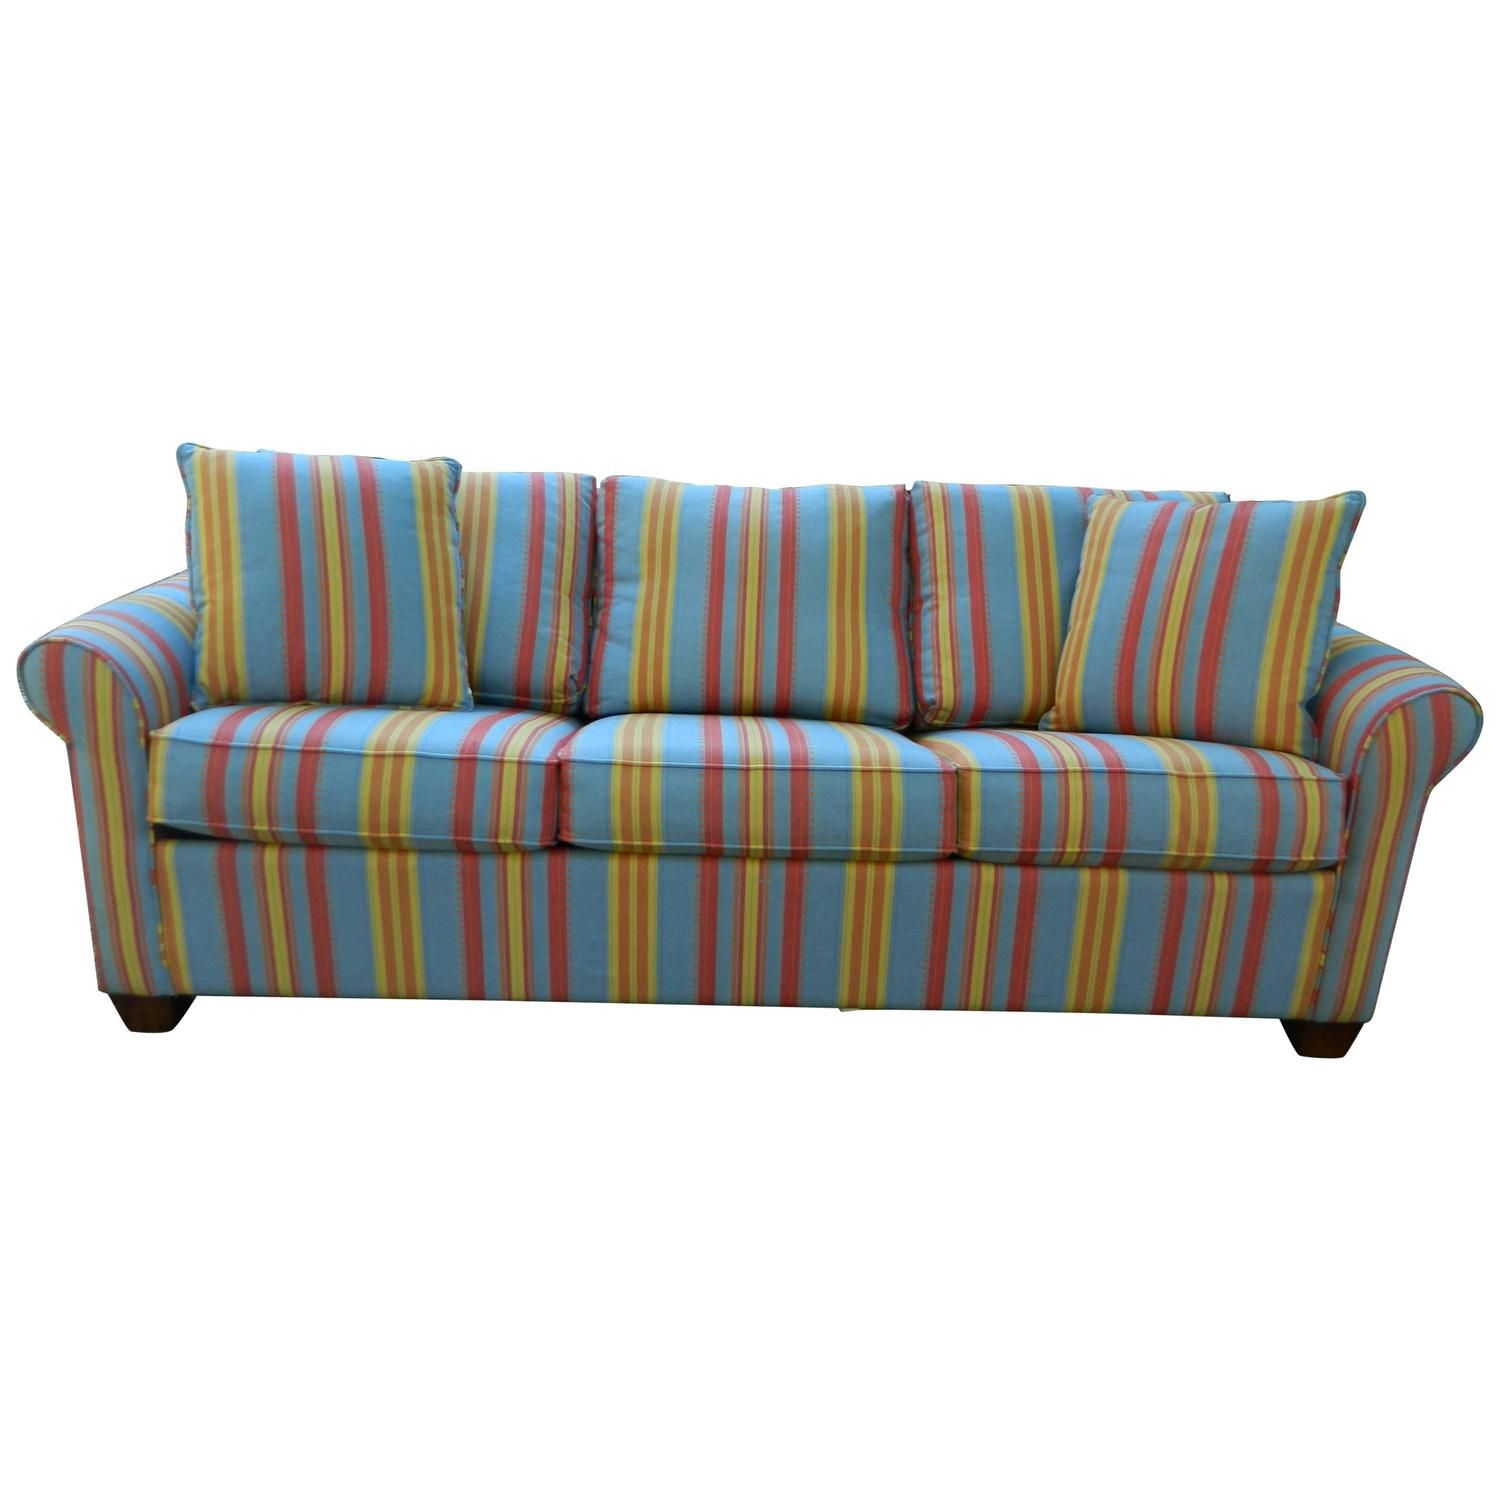 Multi Coloured Sofas For Sale : Buy Or Sell Sofas Colored. – Iwanna Fly Within Sofas In Multiple Colors (Gallery 17 of 20)